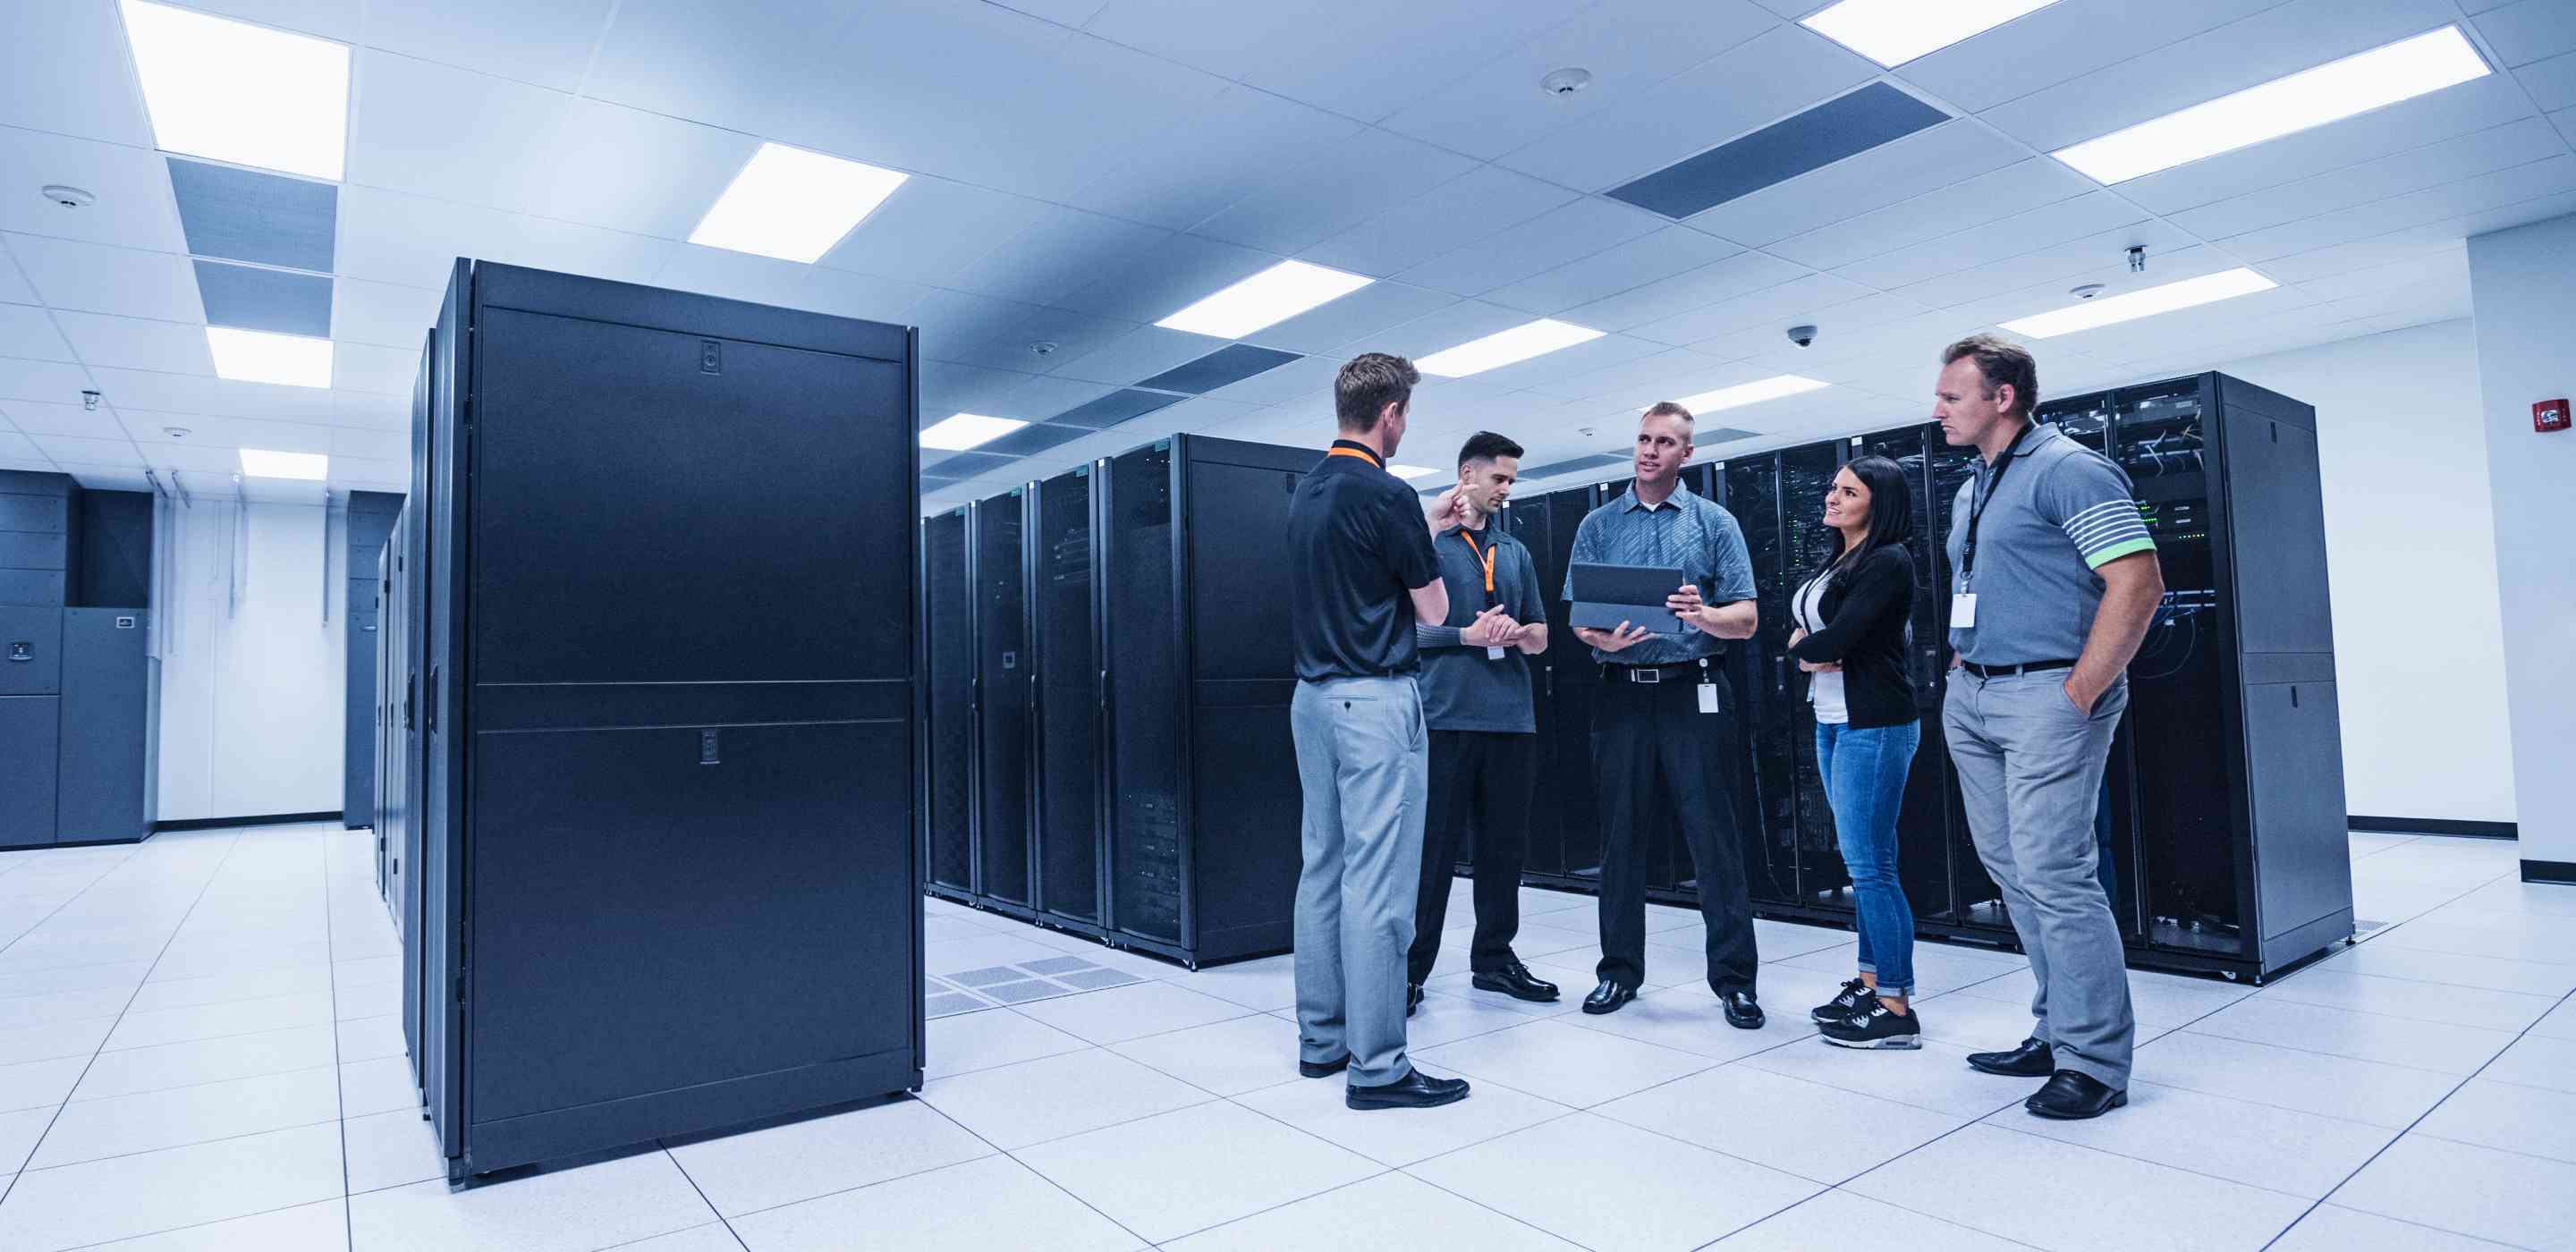 A group of people standing in a server room